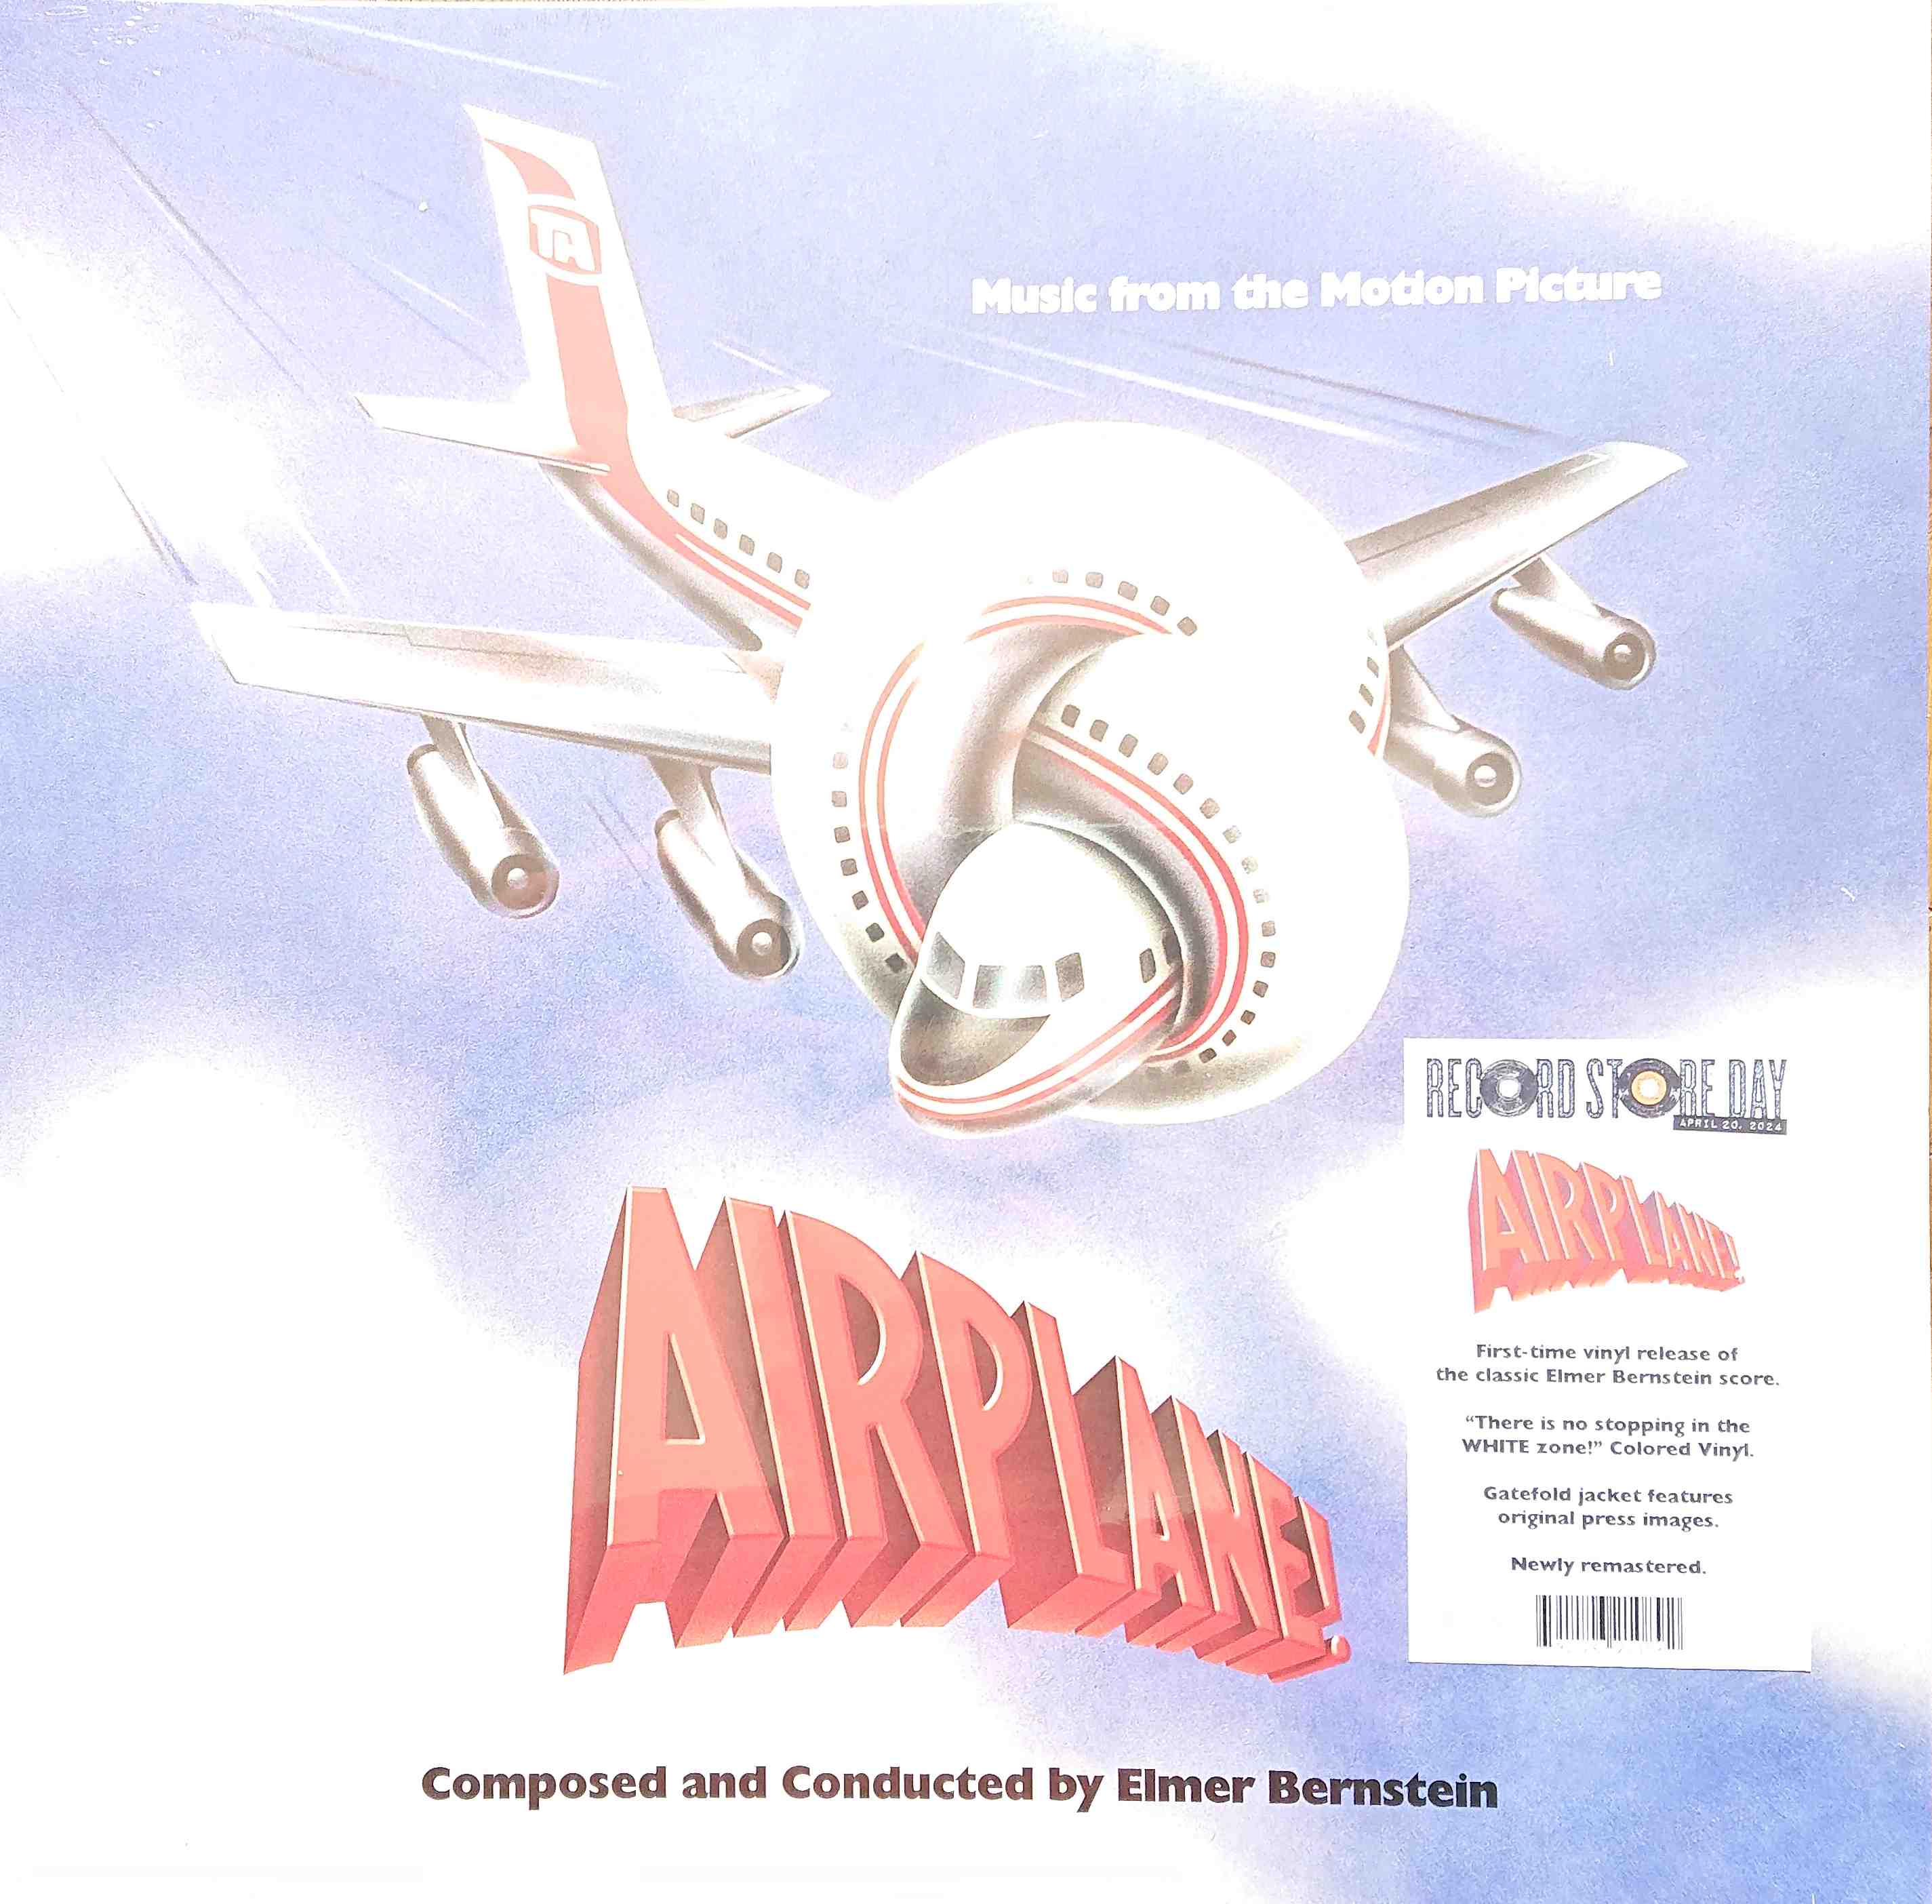 Picture of Airplane! by artist Elmer Bernstein from ITV, Channel 4 and Channel 5 albums library